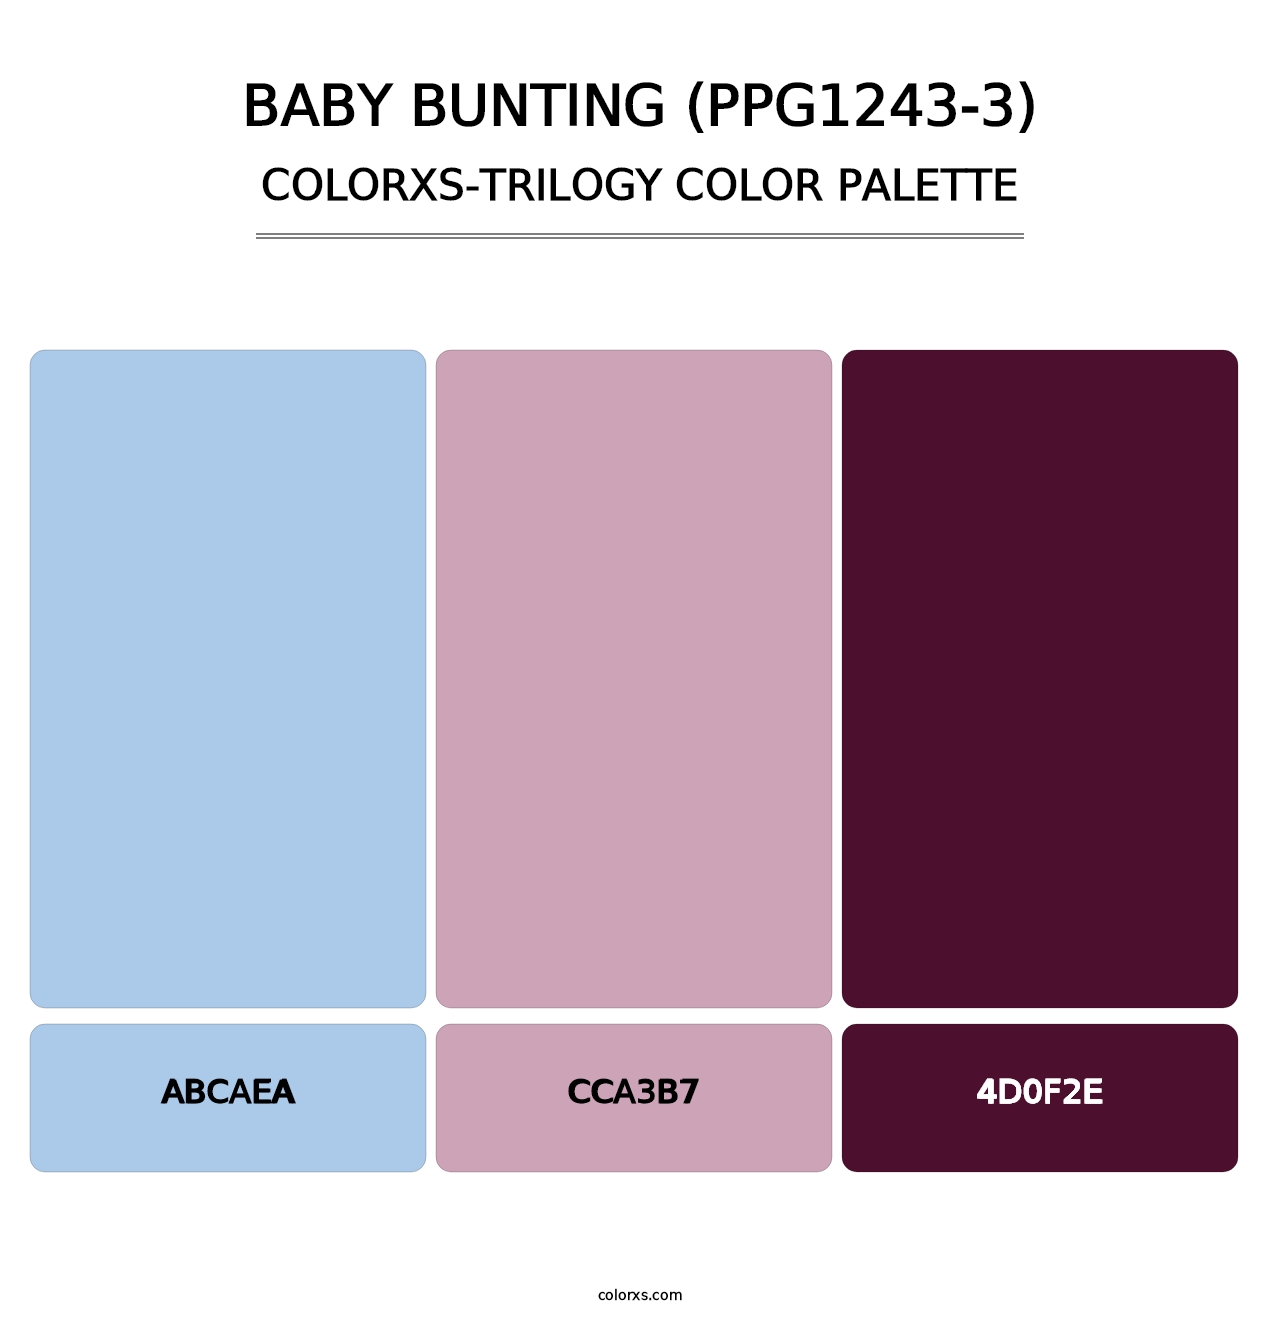 Baby Bunting (PPG1243-3) - Colorxs Trilogy Palette